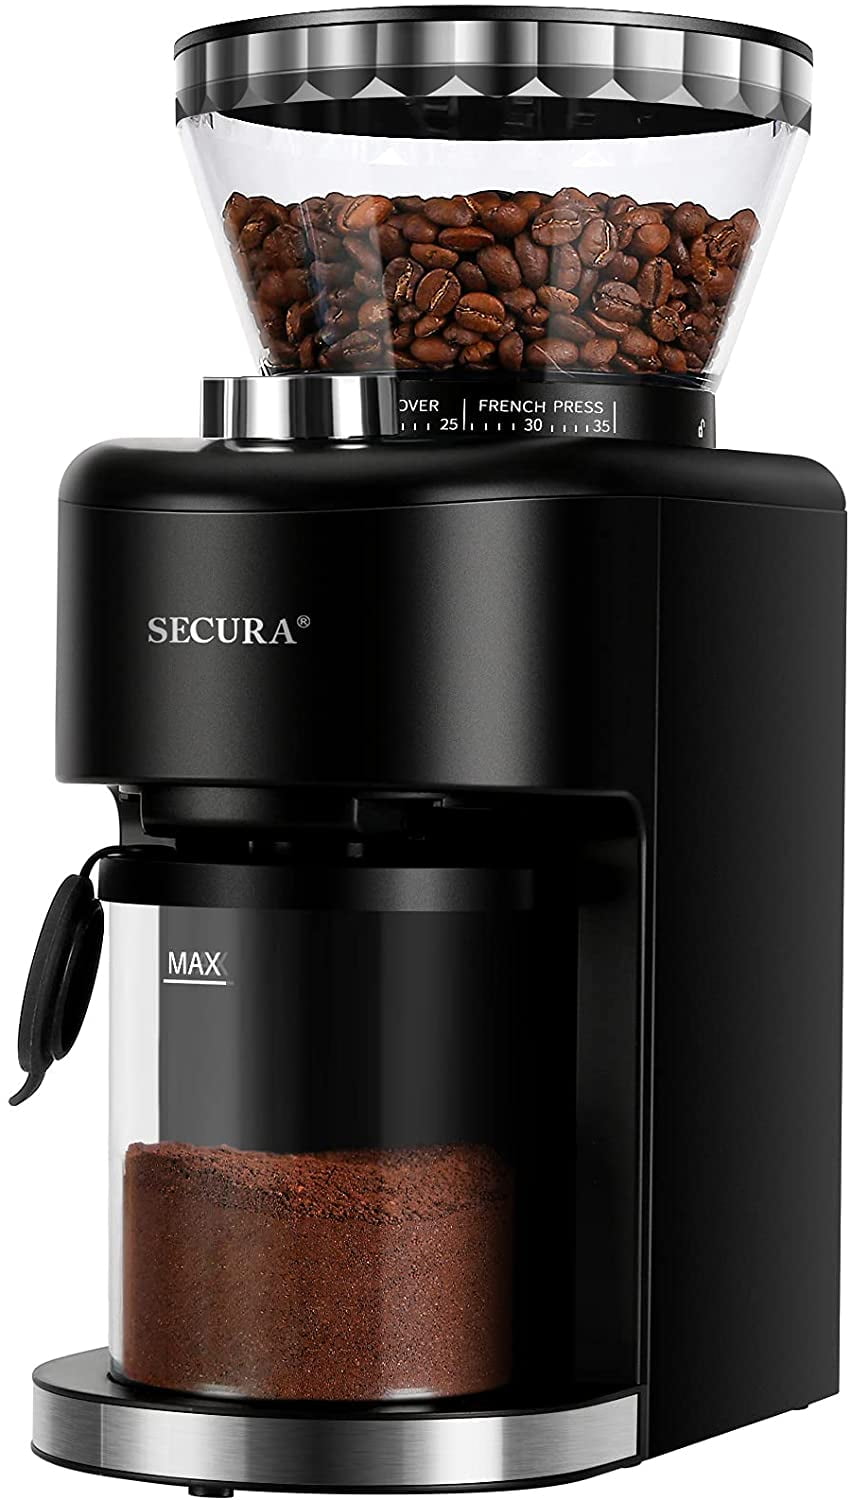 35 Grind Settings Cups Electric Conical Burr Coffee Grinder for